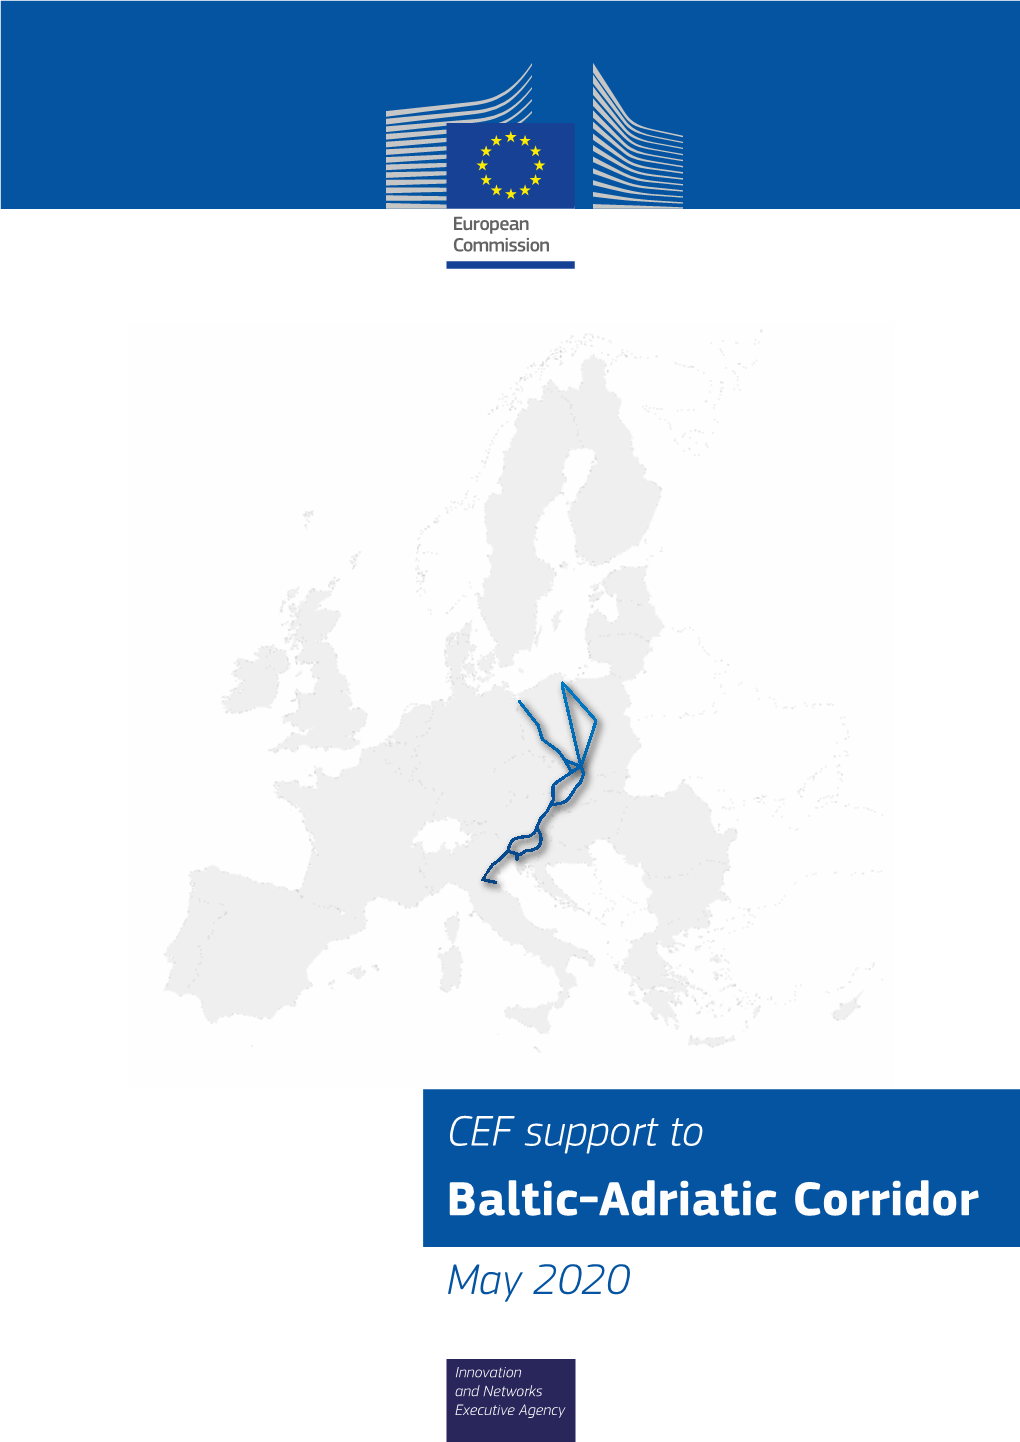 CEF Support to Baltic-Adriatic Corridor May 2020